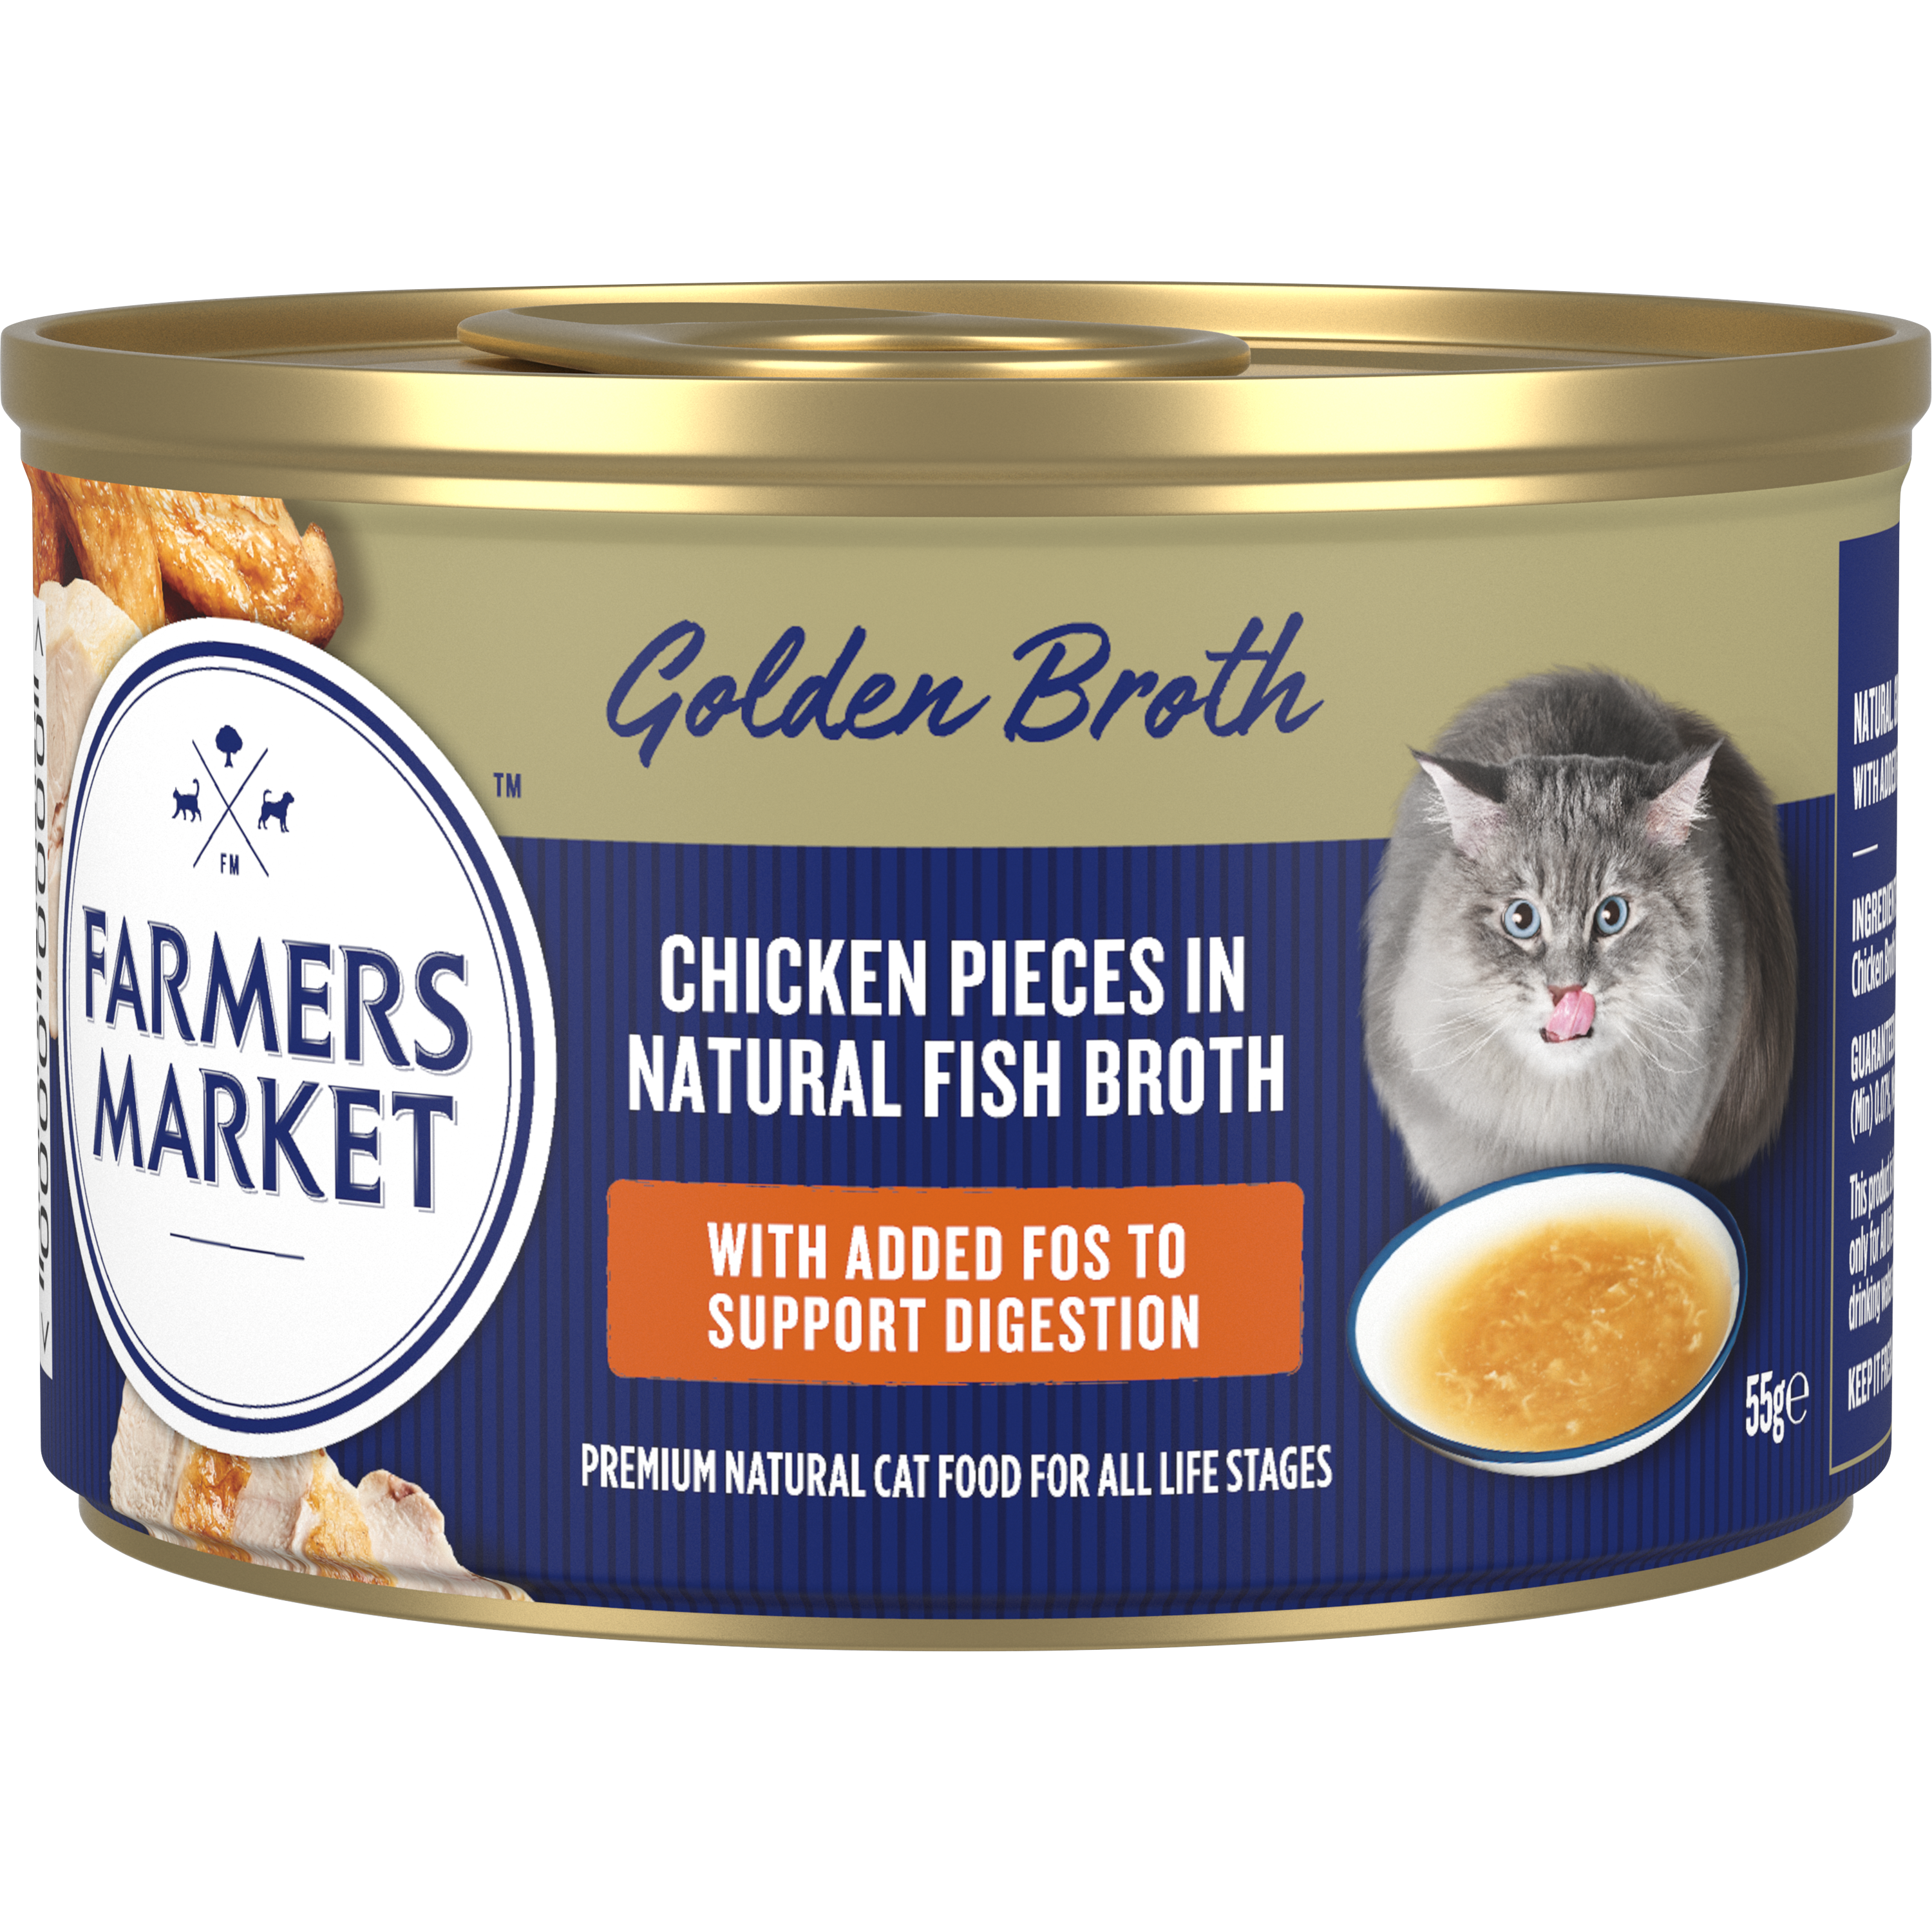 Farmers Market Golden Broth - Chicken Pieces in Natural Fish Broth 55g